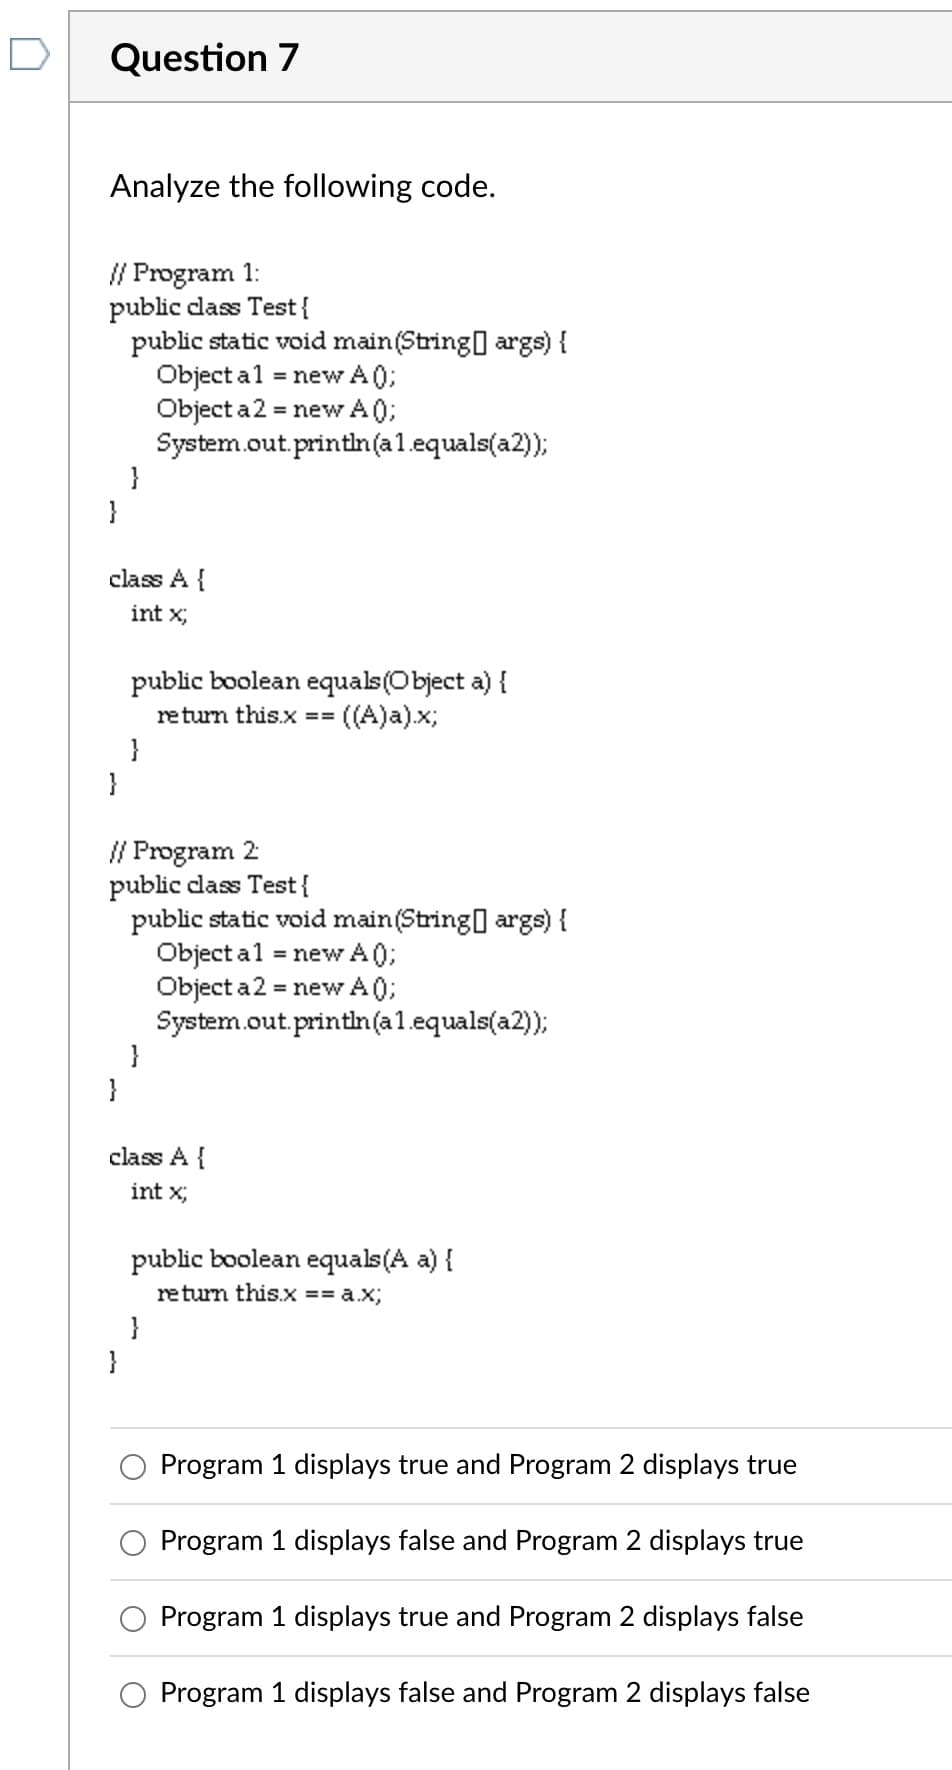 Question 7
Analyze the following code.
// Program 1:
public class Test{
public static void main(String[] args) {
Object a1 = new A0);
Object a 2 = new A0);
System.out.println(a1.equals(a2));
}
}
class A {
int x;
public boolean equals(Object a) {
= ((A)a).x;
return this.x ==
}
}
// Program 2
public class Test{
public static void main(String[] args) {
Object a 1 = new A0);
Object a 2 = new A0);
System.out.println(a1.equals(a2));
}
class A {
int x;
public boolean equals(A a) {
return this.x == a.x;
}
}
Program 1 displays true and Program 2 displays true
Program 1 displays false and Program 2 displays true
Program 1 displays true and Program 2 displays false
O Program 1 displays false and Program 2 displays false